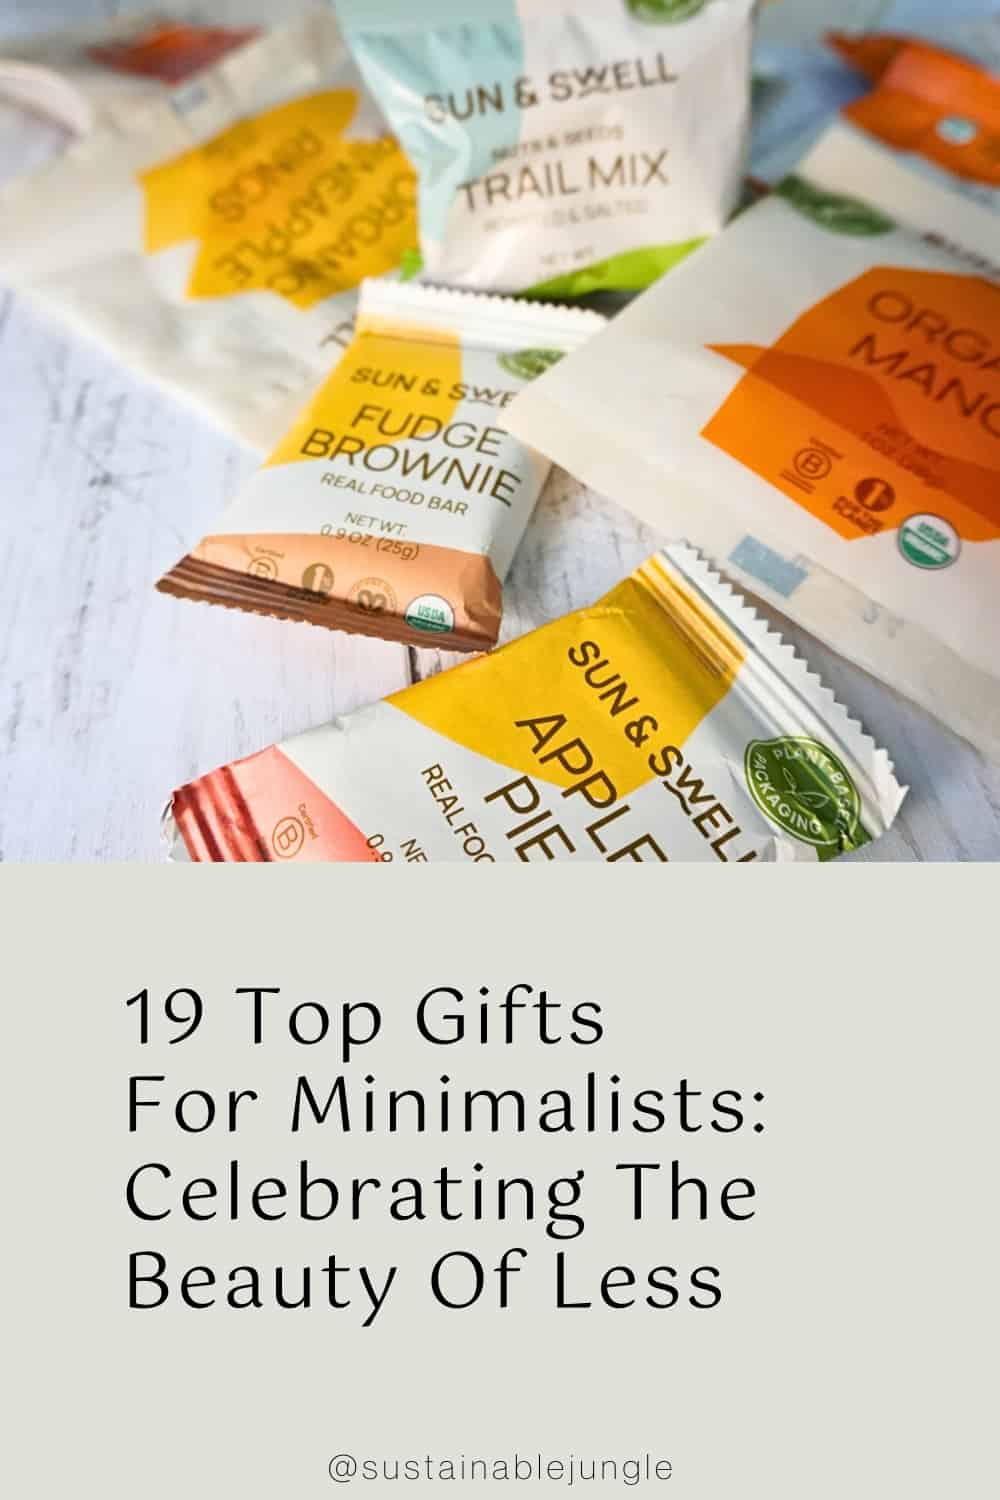 19 Top Gifts For Minimalists: Celebrating The Beauty Of Less Image by Sustainable Jungle #giftsforminimalists #bestgiftsforminimalists #minimalistgifts #minimalistgiftideas #minimalistChristmasgifts #sustainablejungle